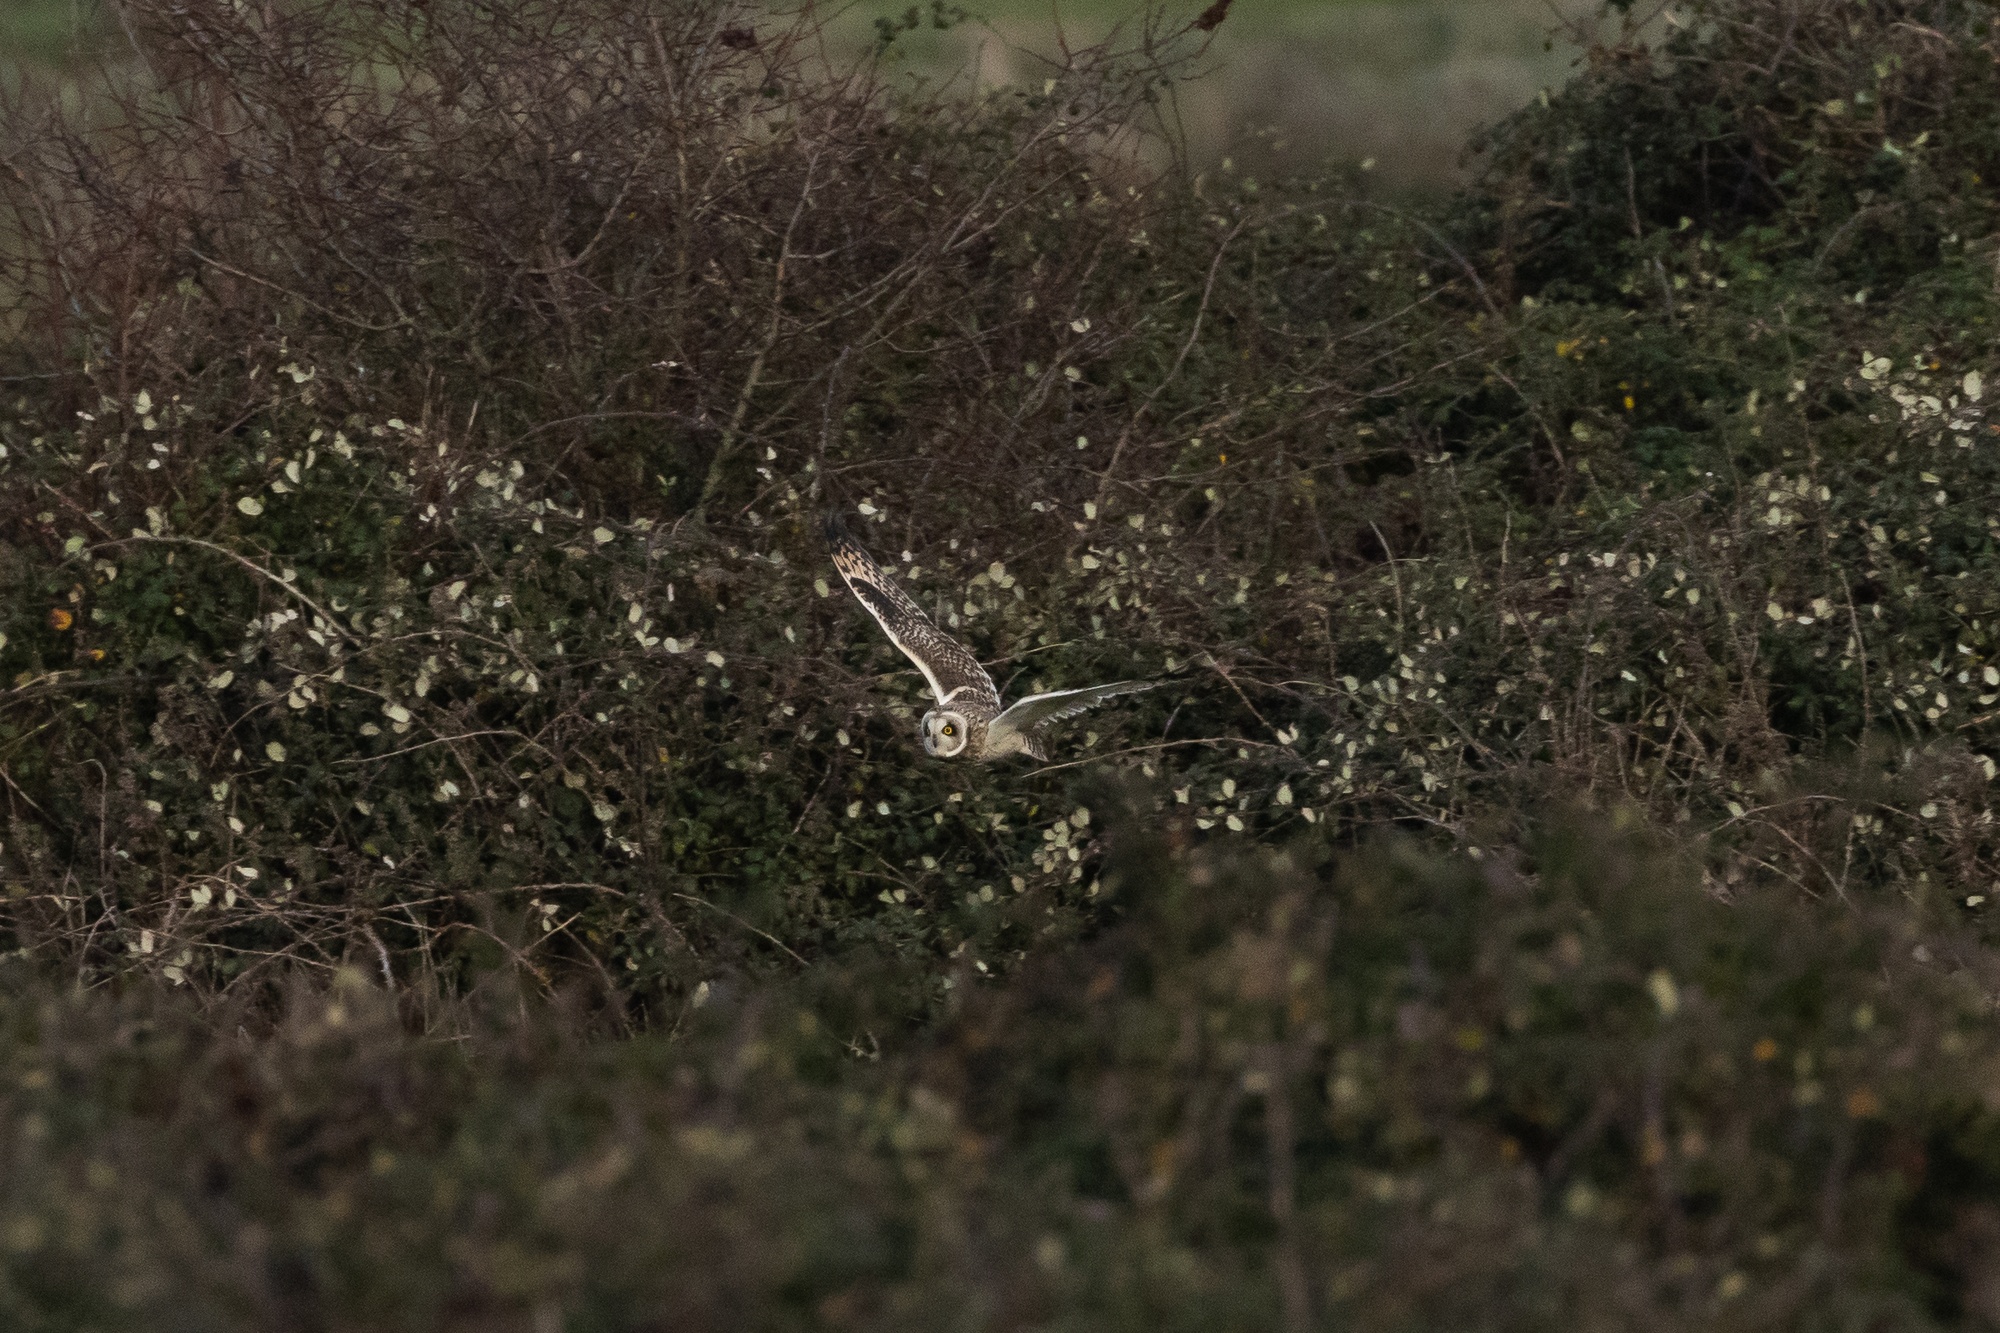 Short-eared owl flying left low between bushes and bramble